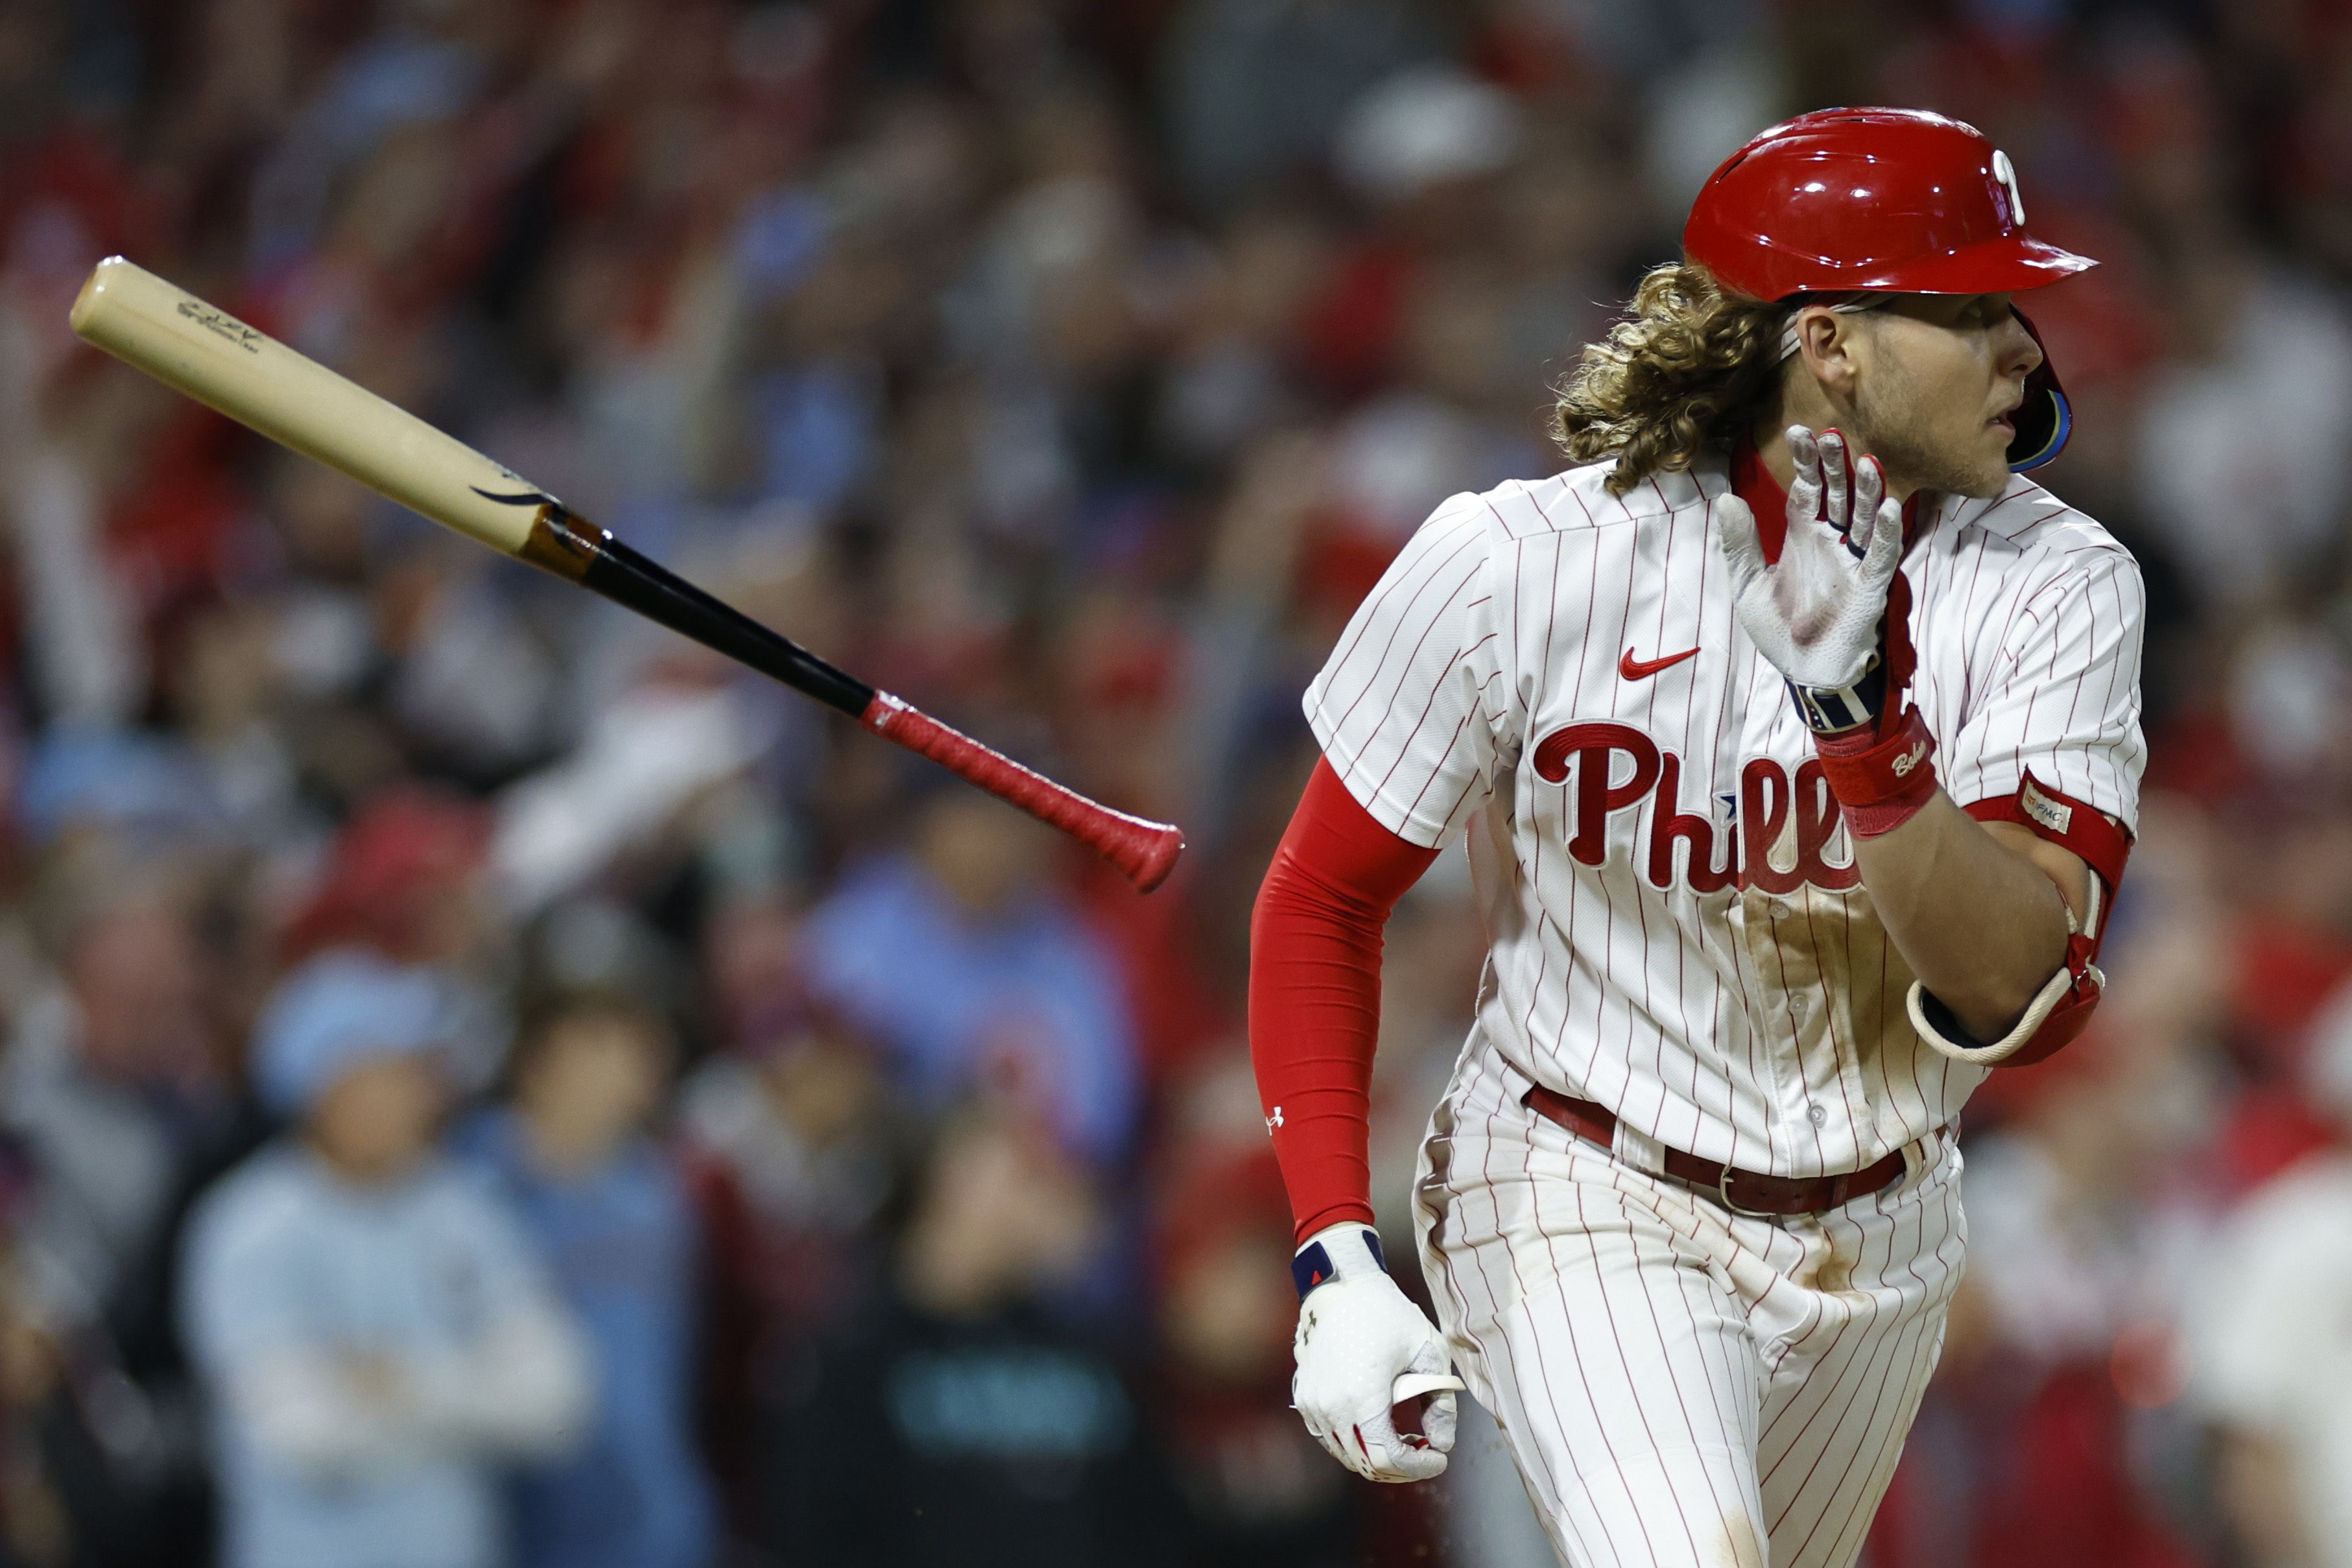 Phillies' World Series run leads wild stretch of Philly success - WHYY